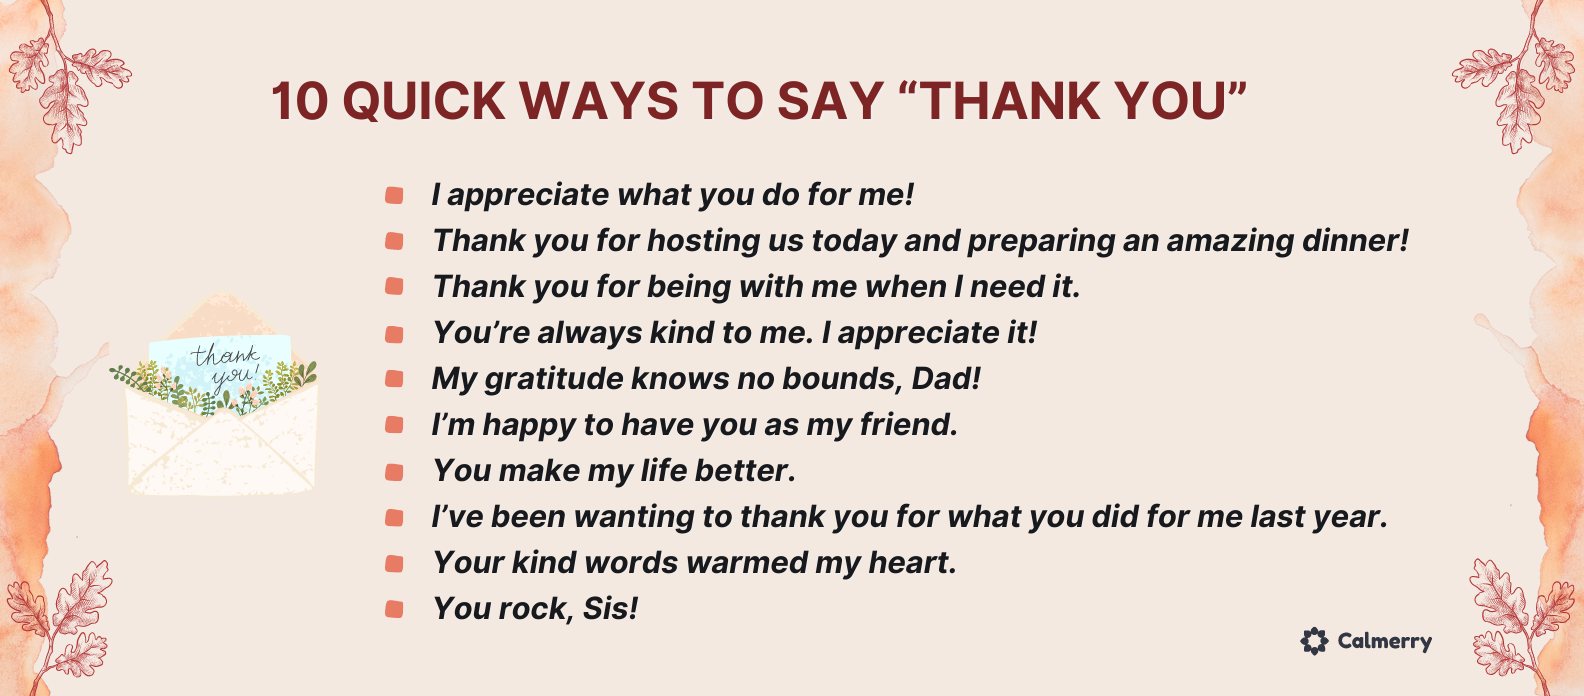 10 quick ways to say “thank you”